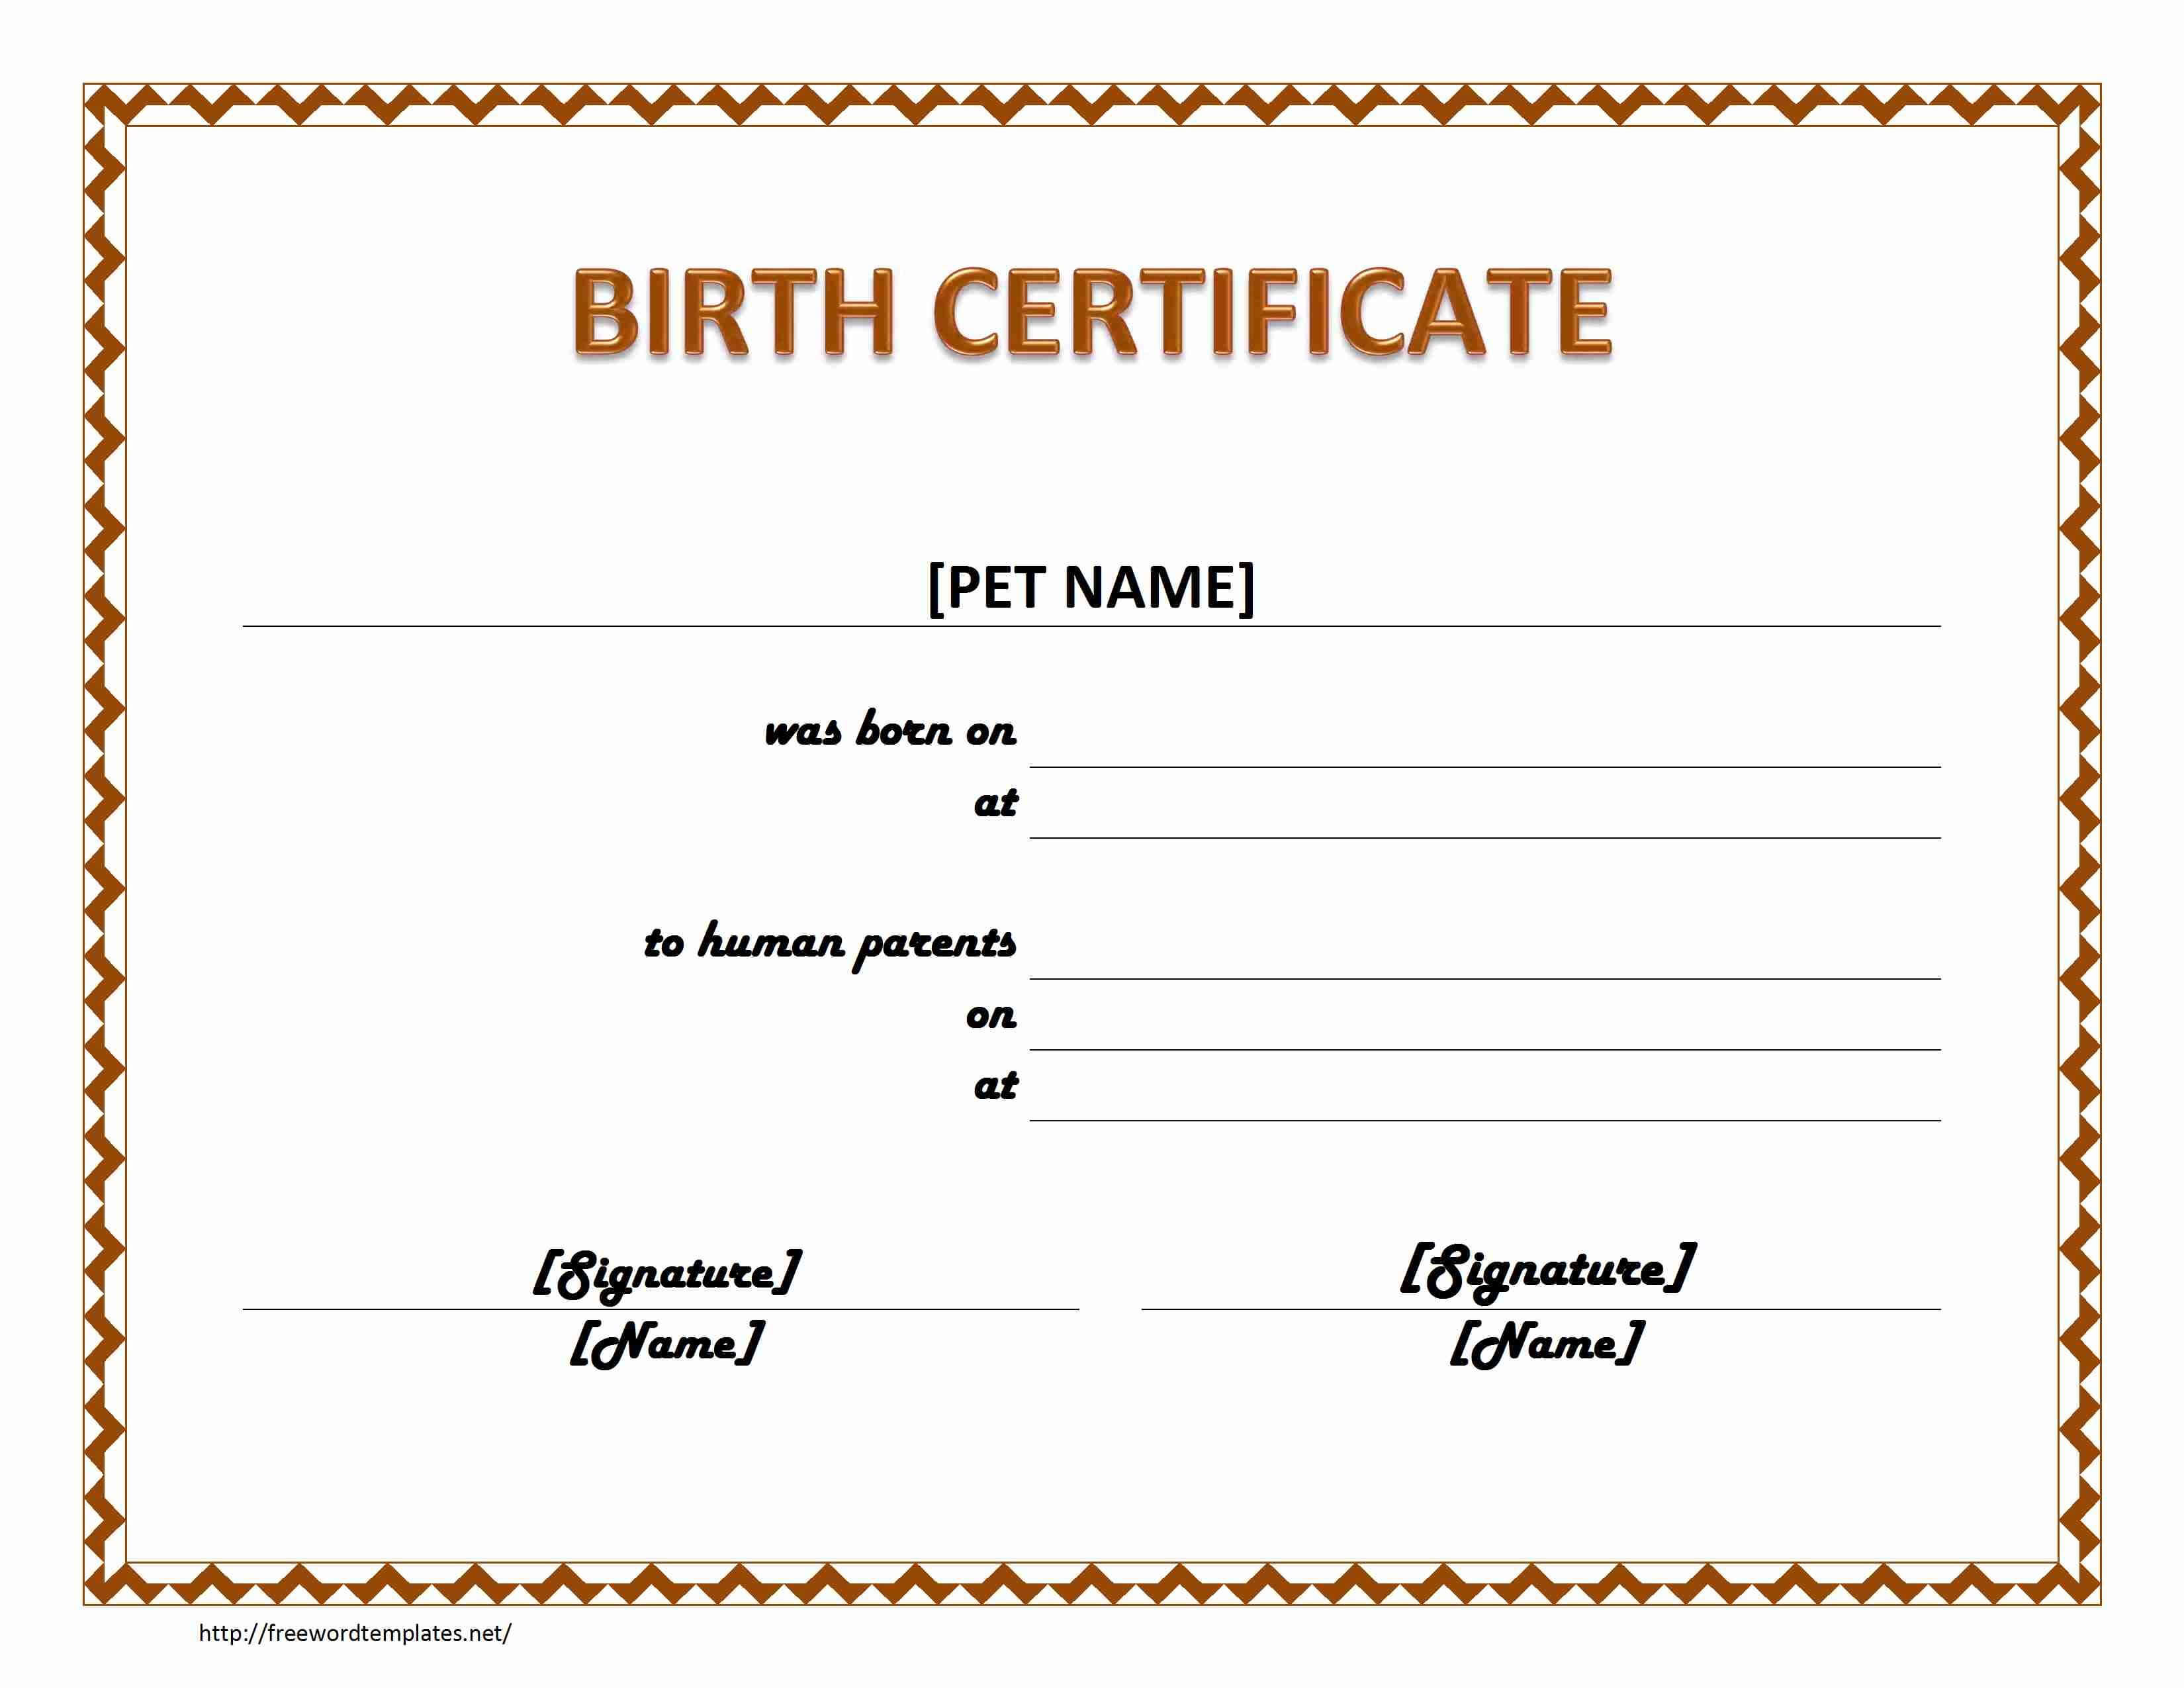 Pet Birth Certificate Maker | Pet Birth Certificate For Word With Regard To Birth Certificate Template For Microsoft Word